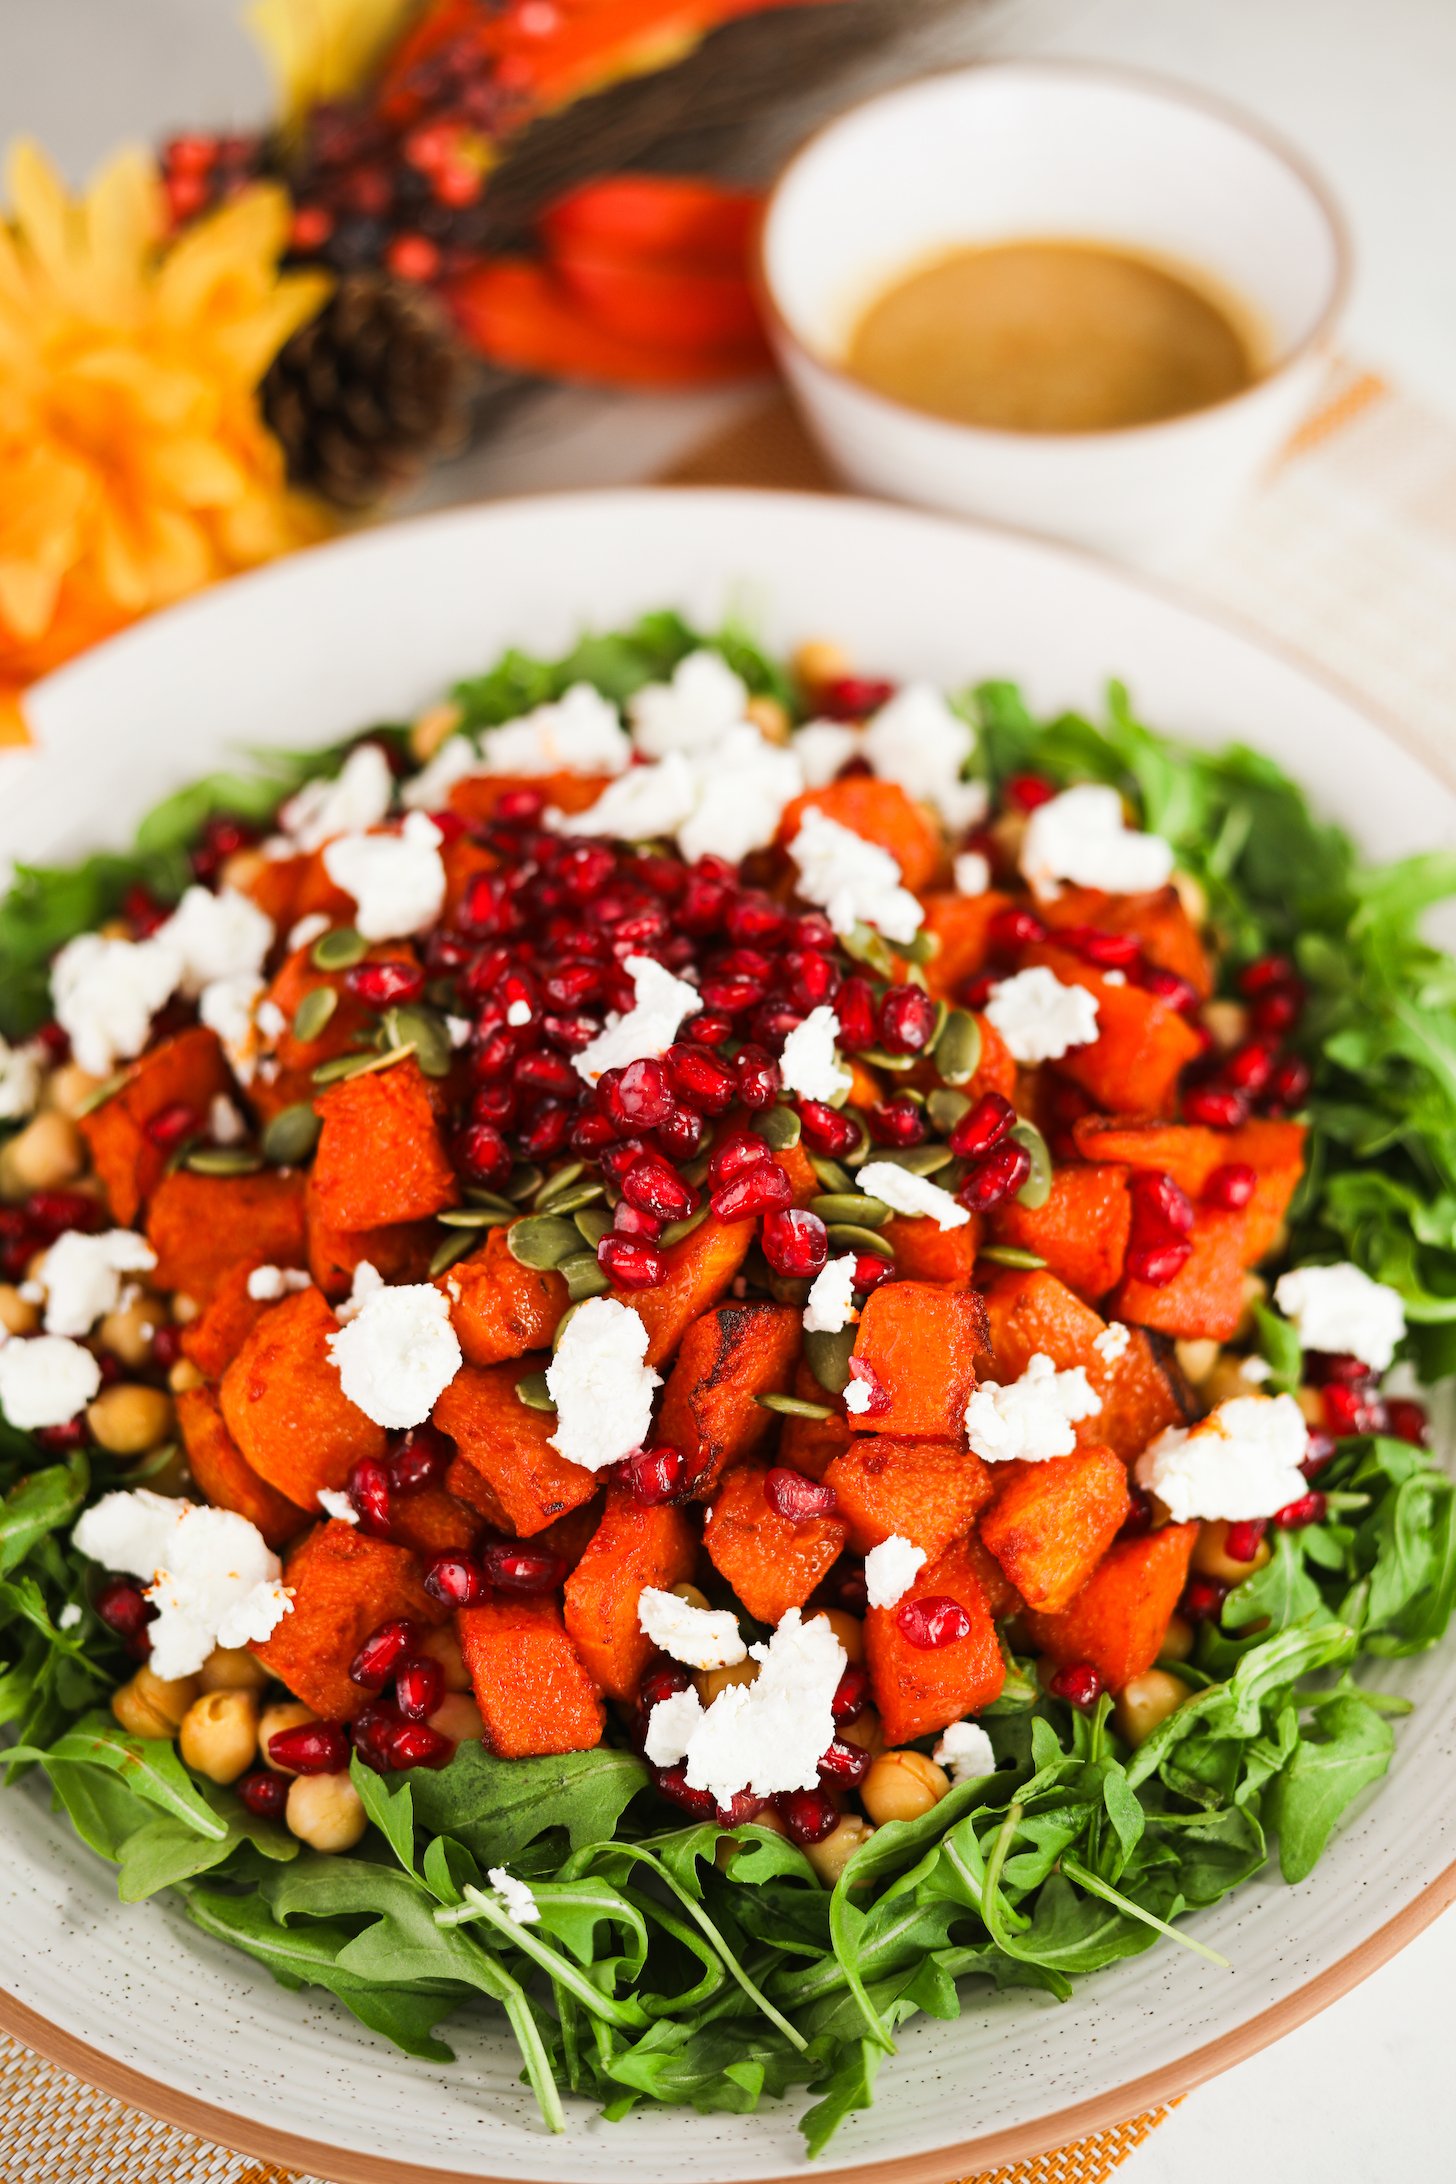 Perspective image showing a layered salad with a bed of arugula, roasted pumpkin pieces, pomegranate kernels, seeds, and chunks of goat cheese on top.